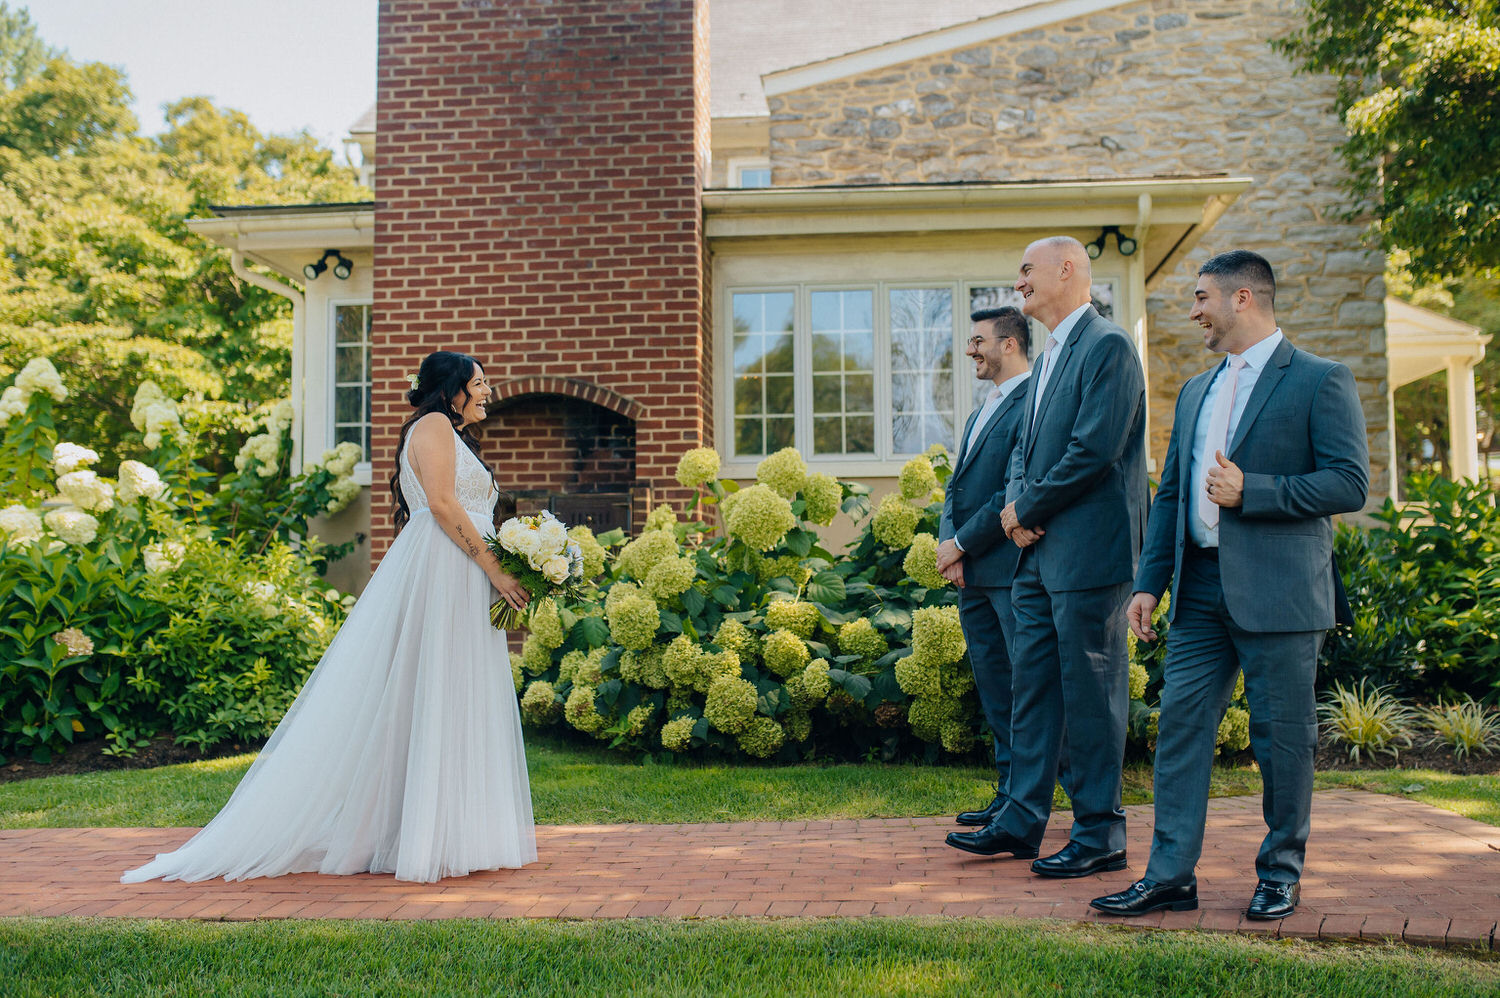 Celebrant in a white dress looking at group of people in tuxedoes during a first look.